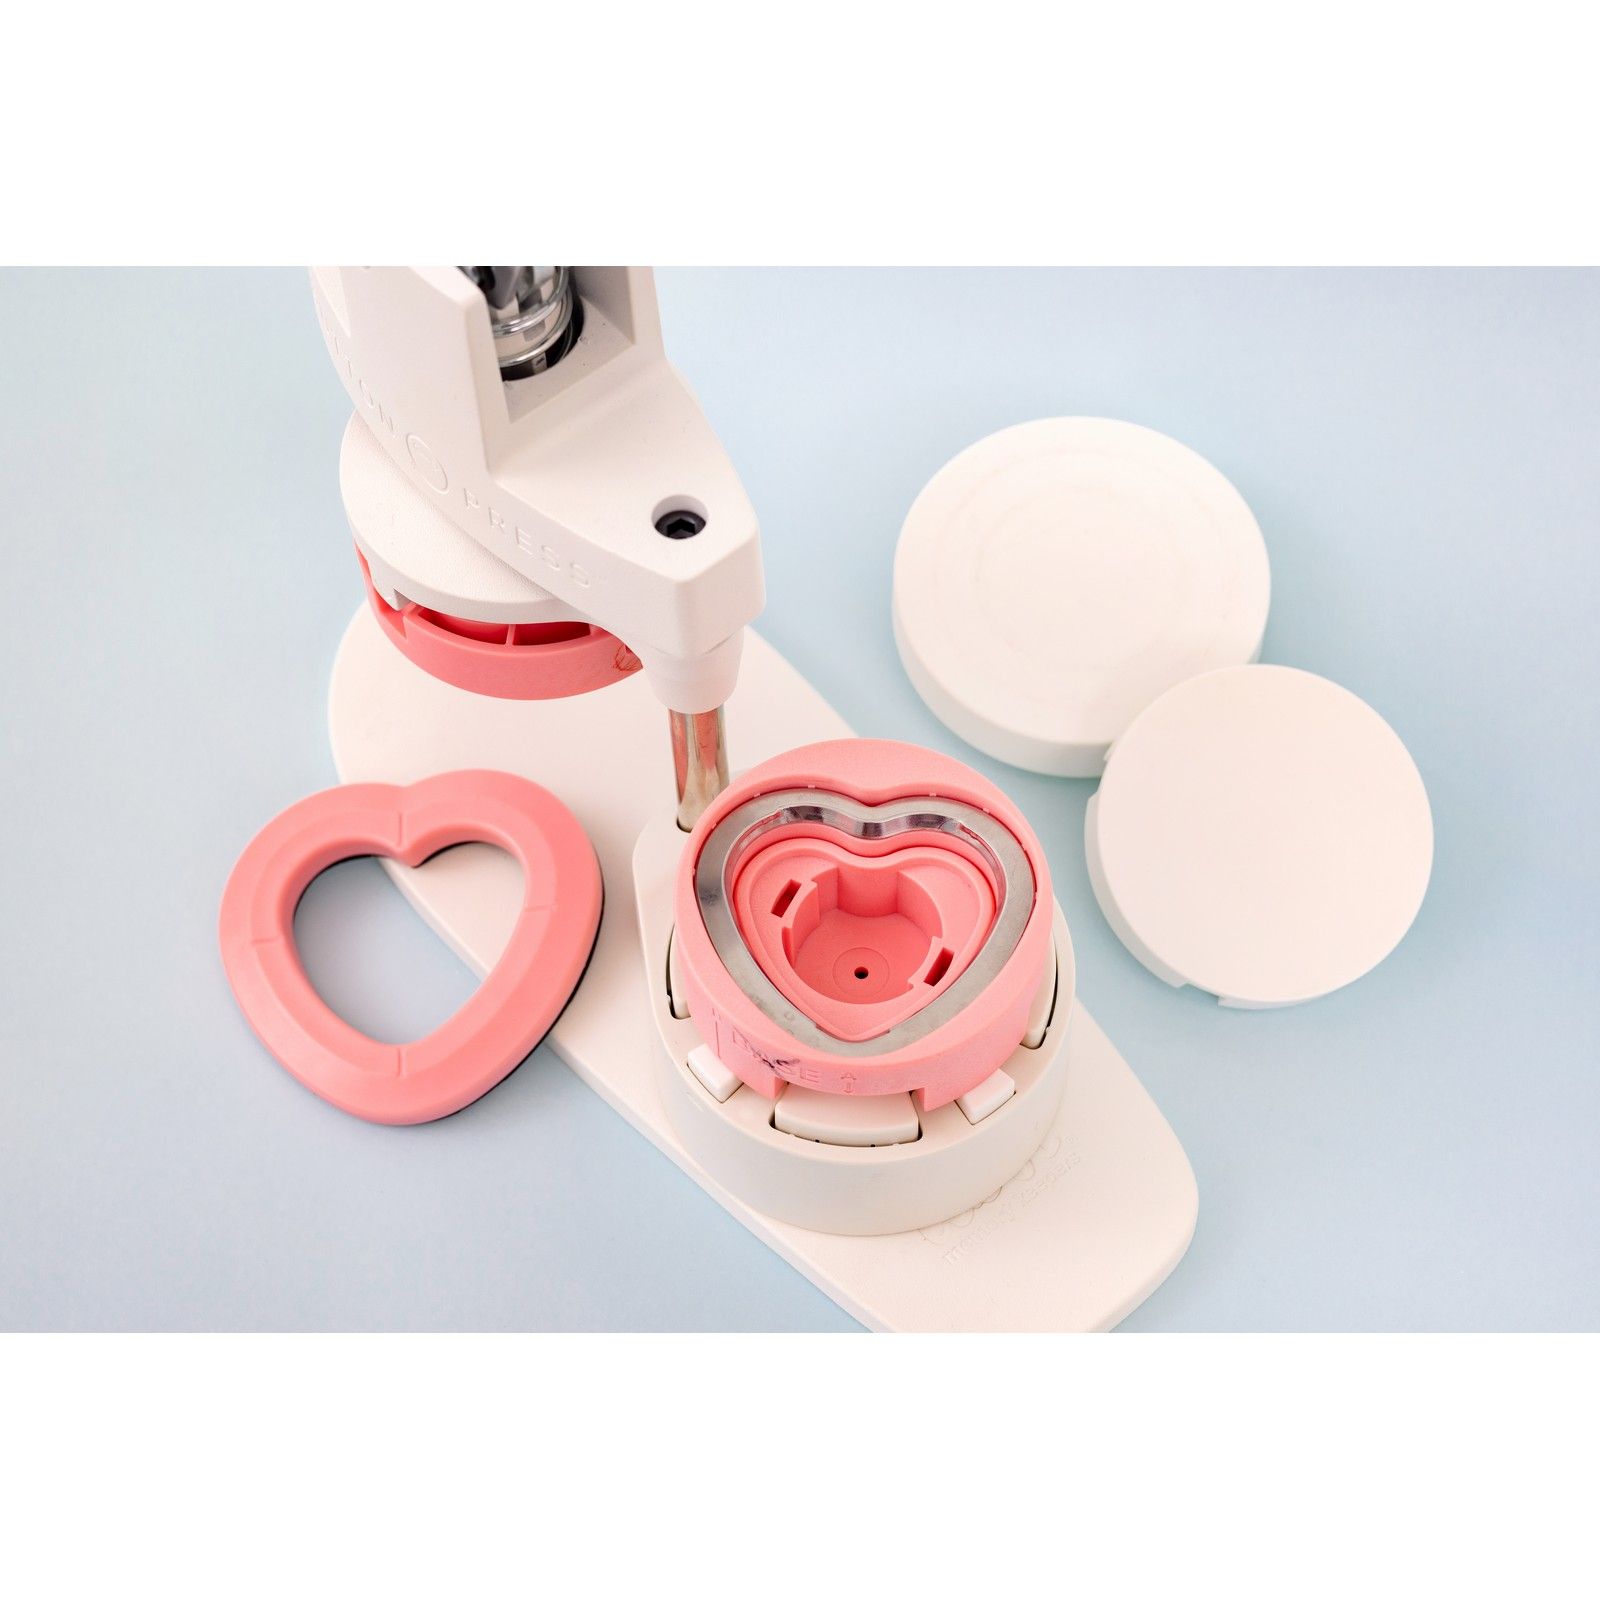 We R Makers - Button Press Collection - Refill Pack - Heart